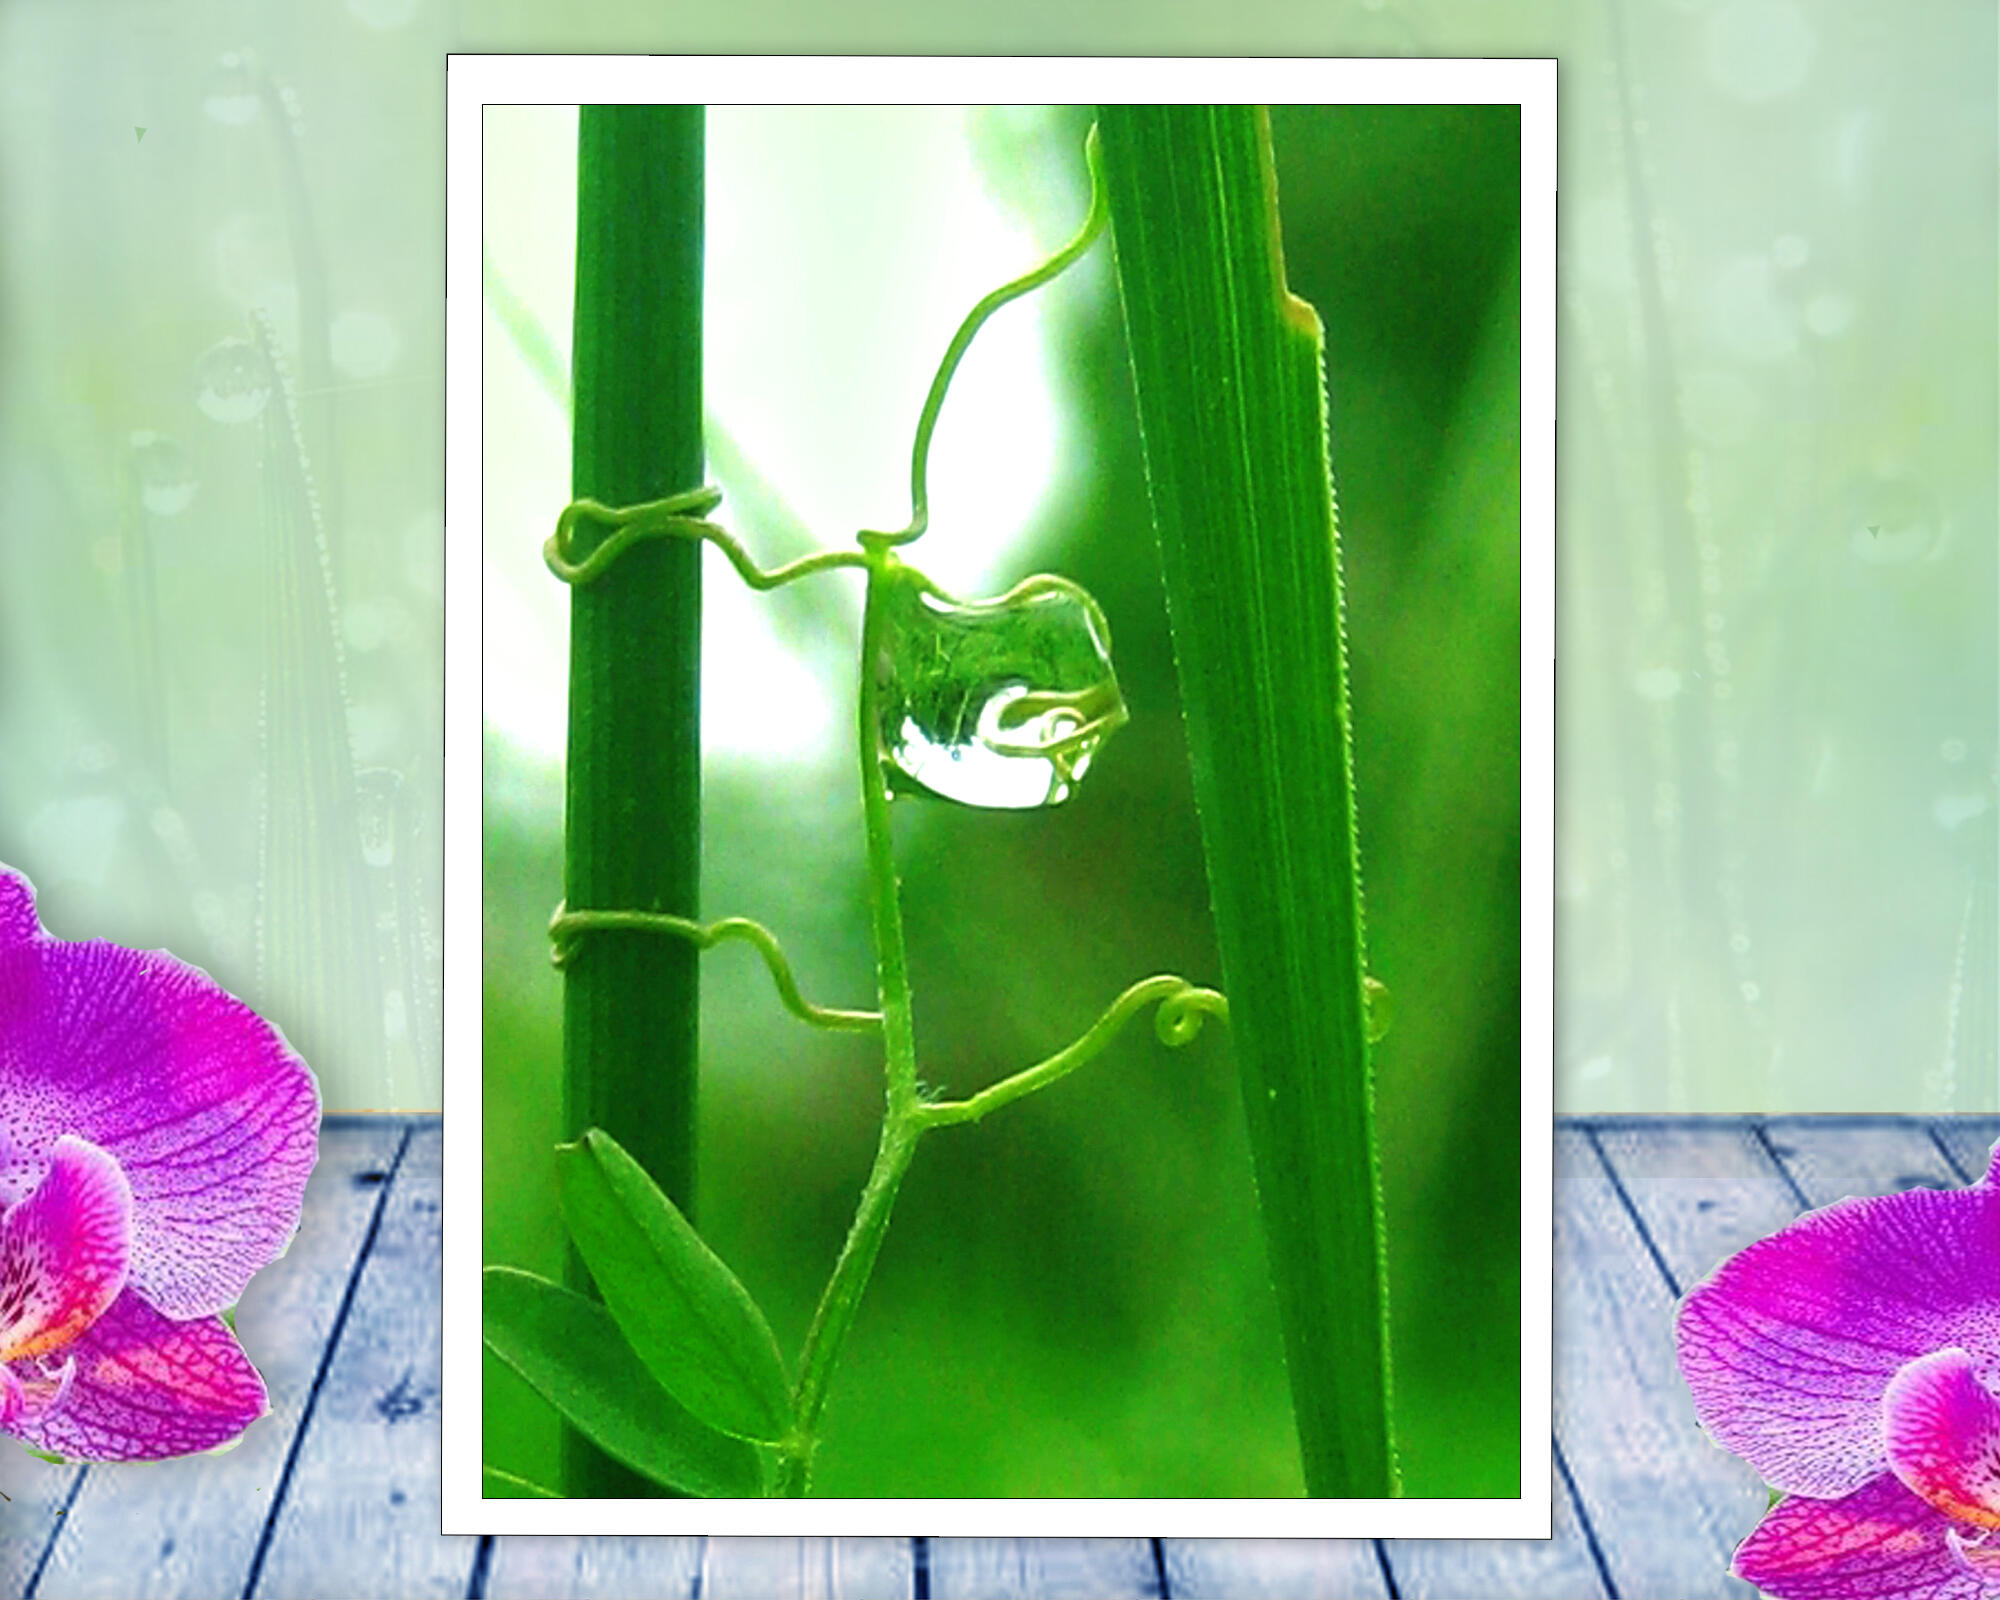 A twisted tendril vine resembles The Fool from Tarot in this peaceful, soothing, nature spirit story. Print with poem.-The Fool by The Poetry of Nature